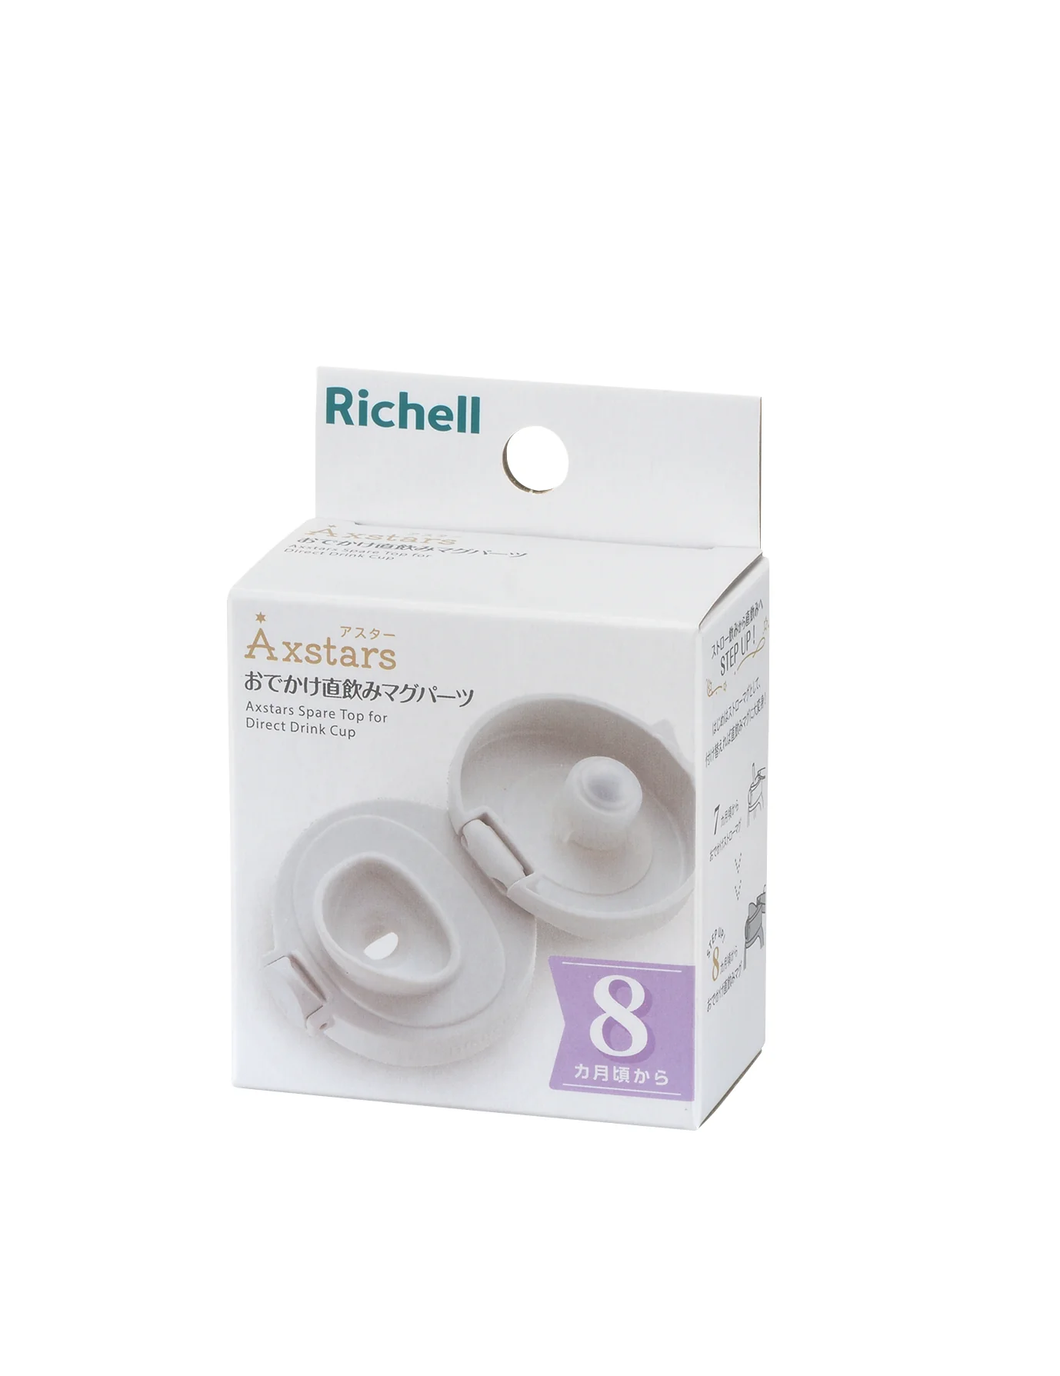 Richell Spare Top For Axstars Direct Drink Cups